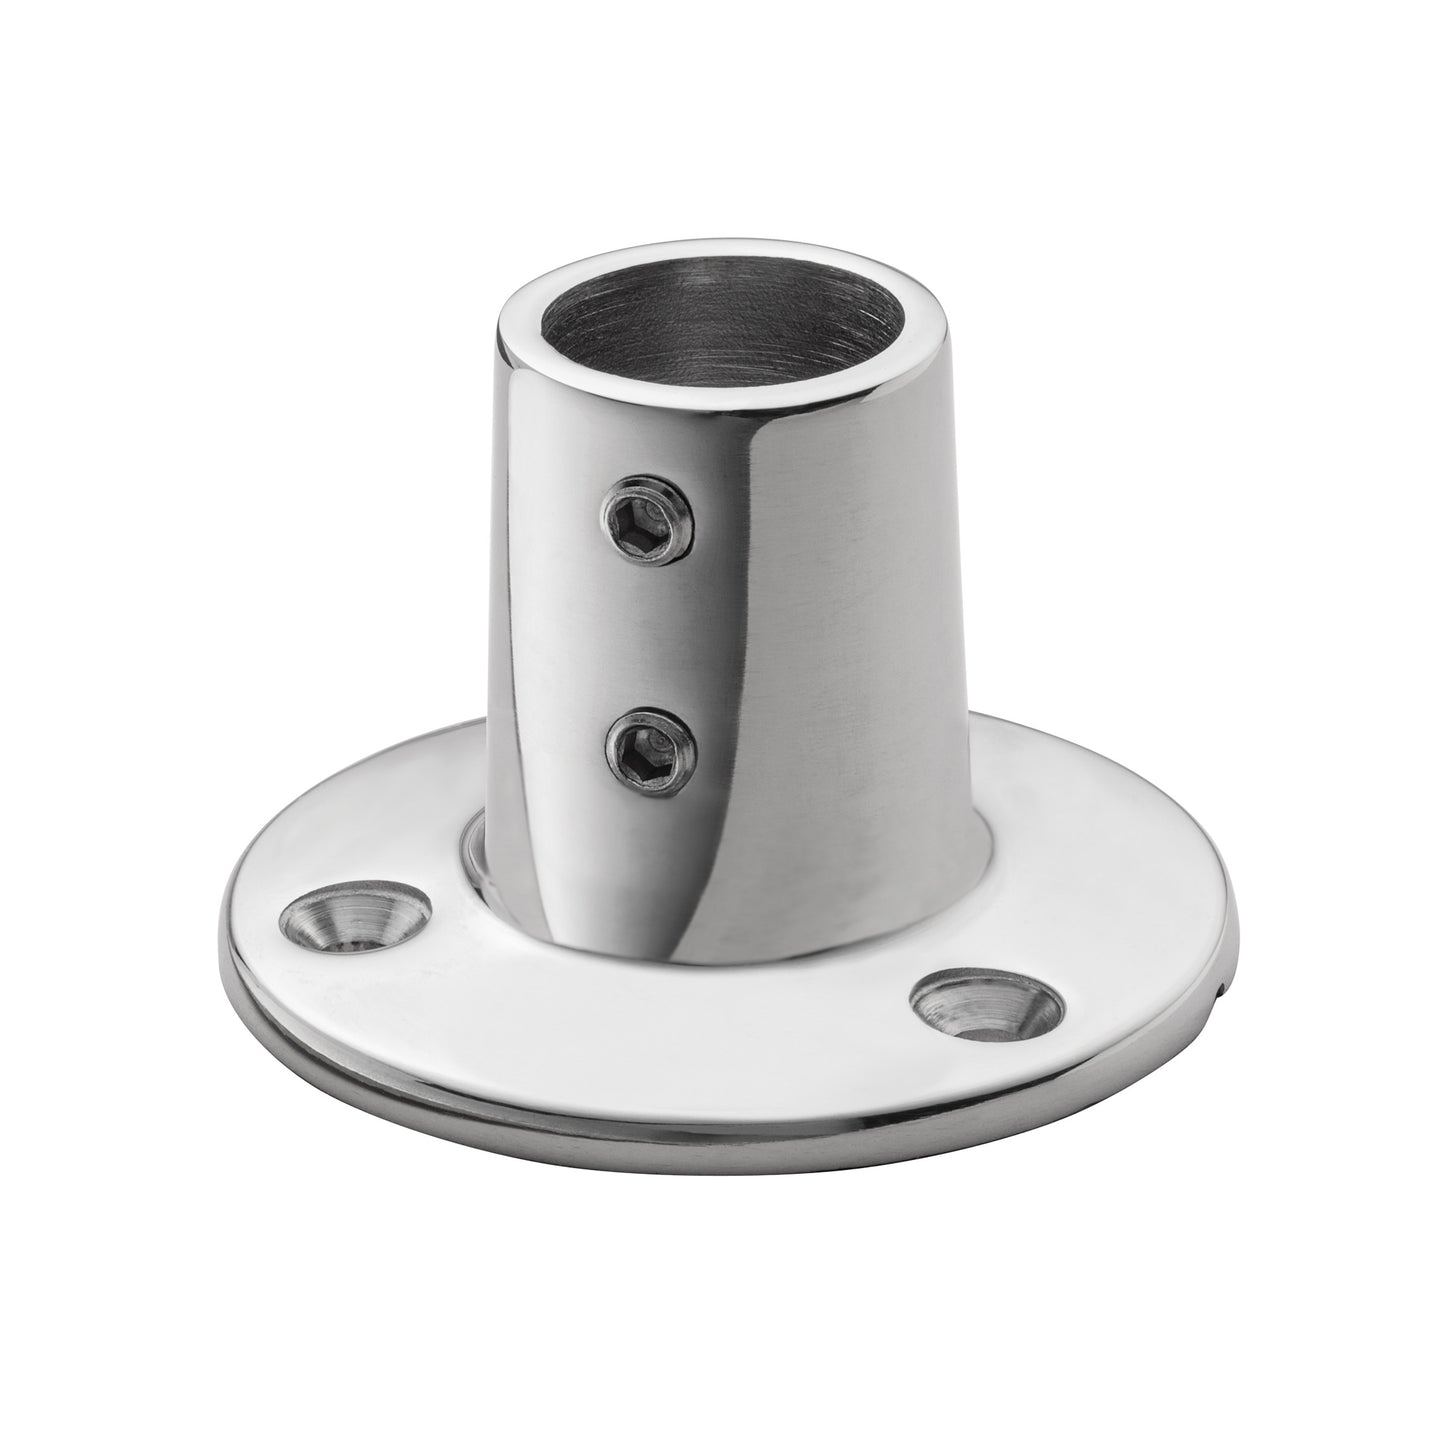 7/8" 316 Stainless Steel 90-Degree Round Base Rail Fitting